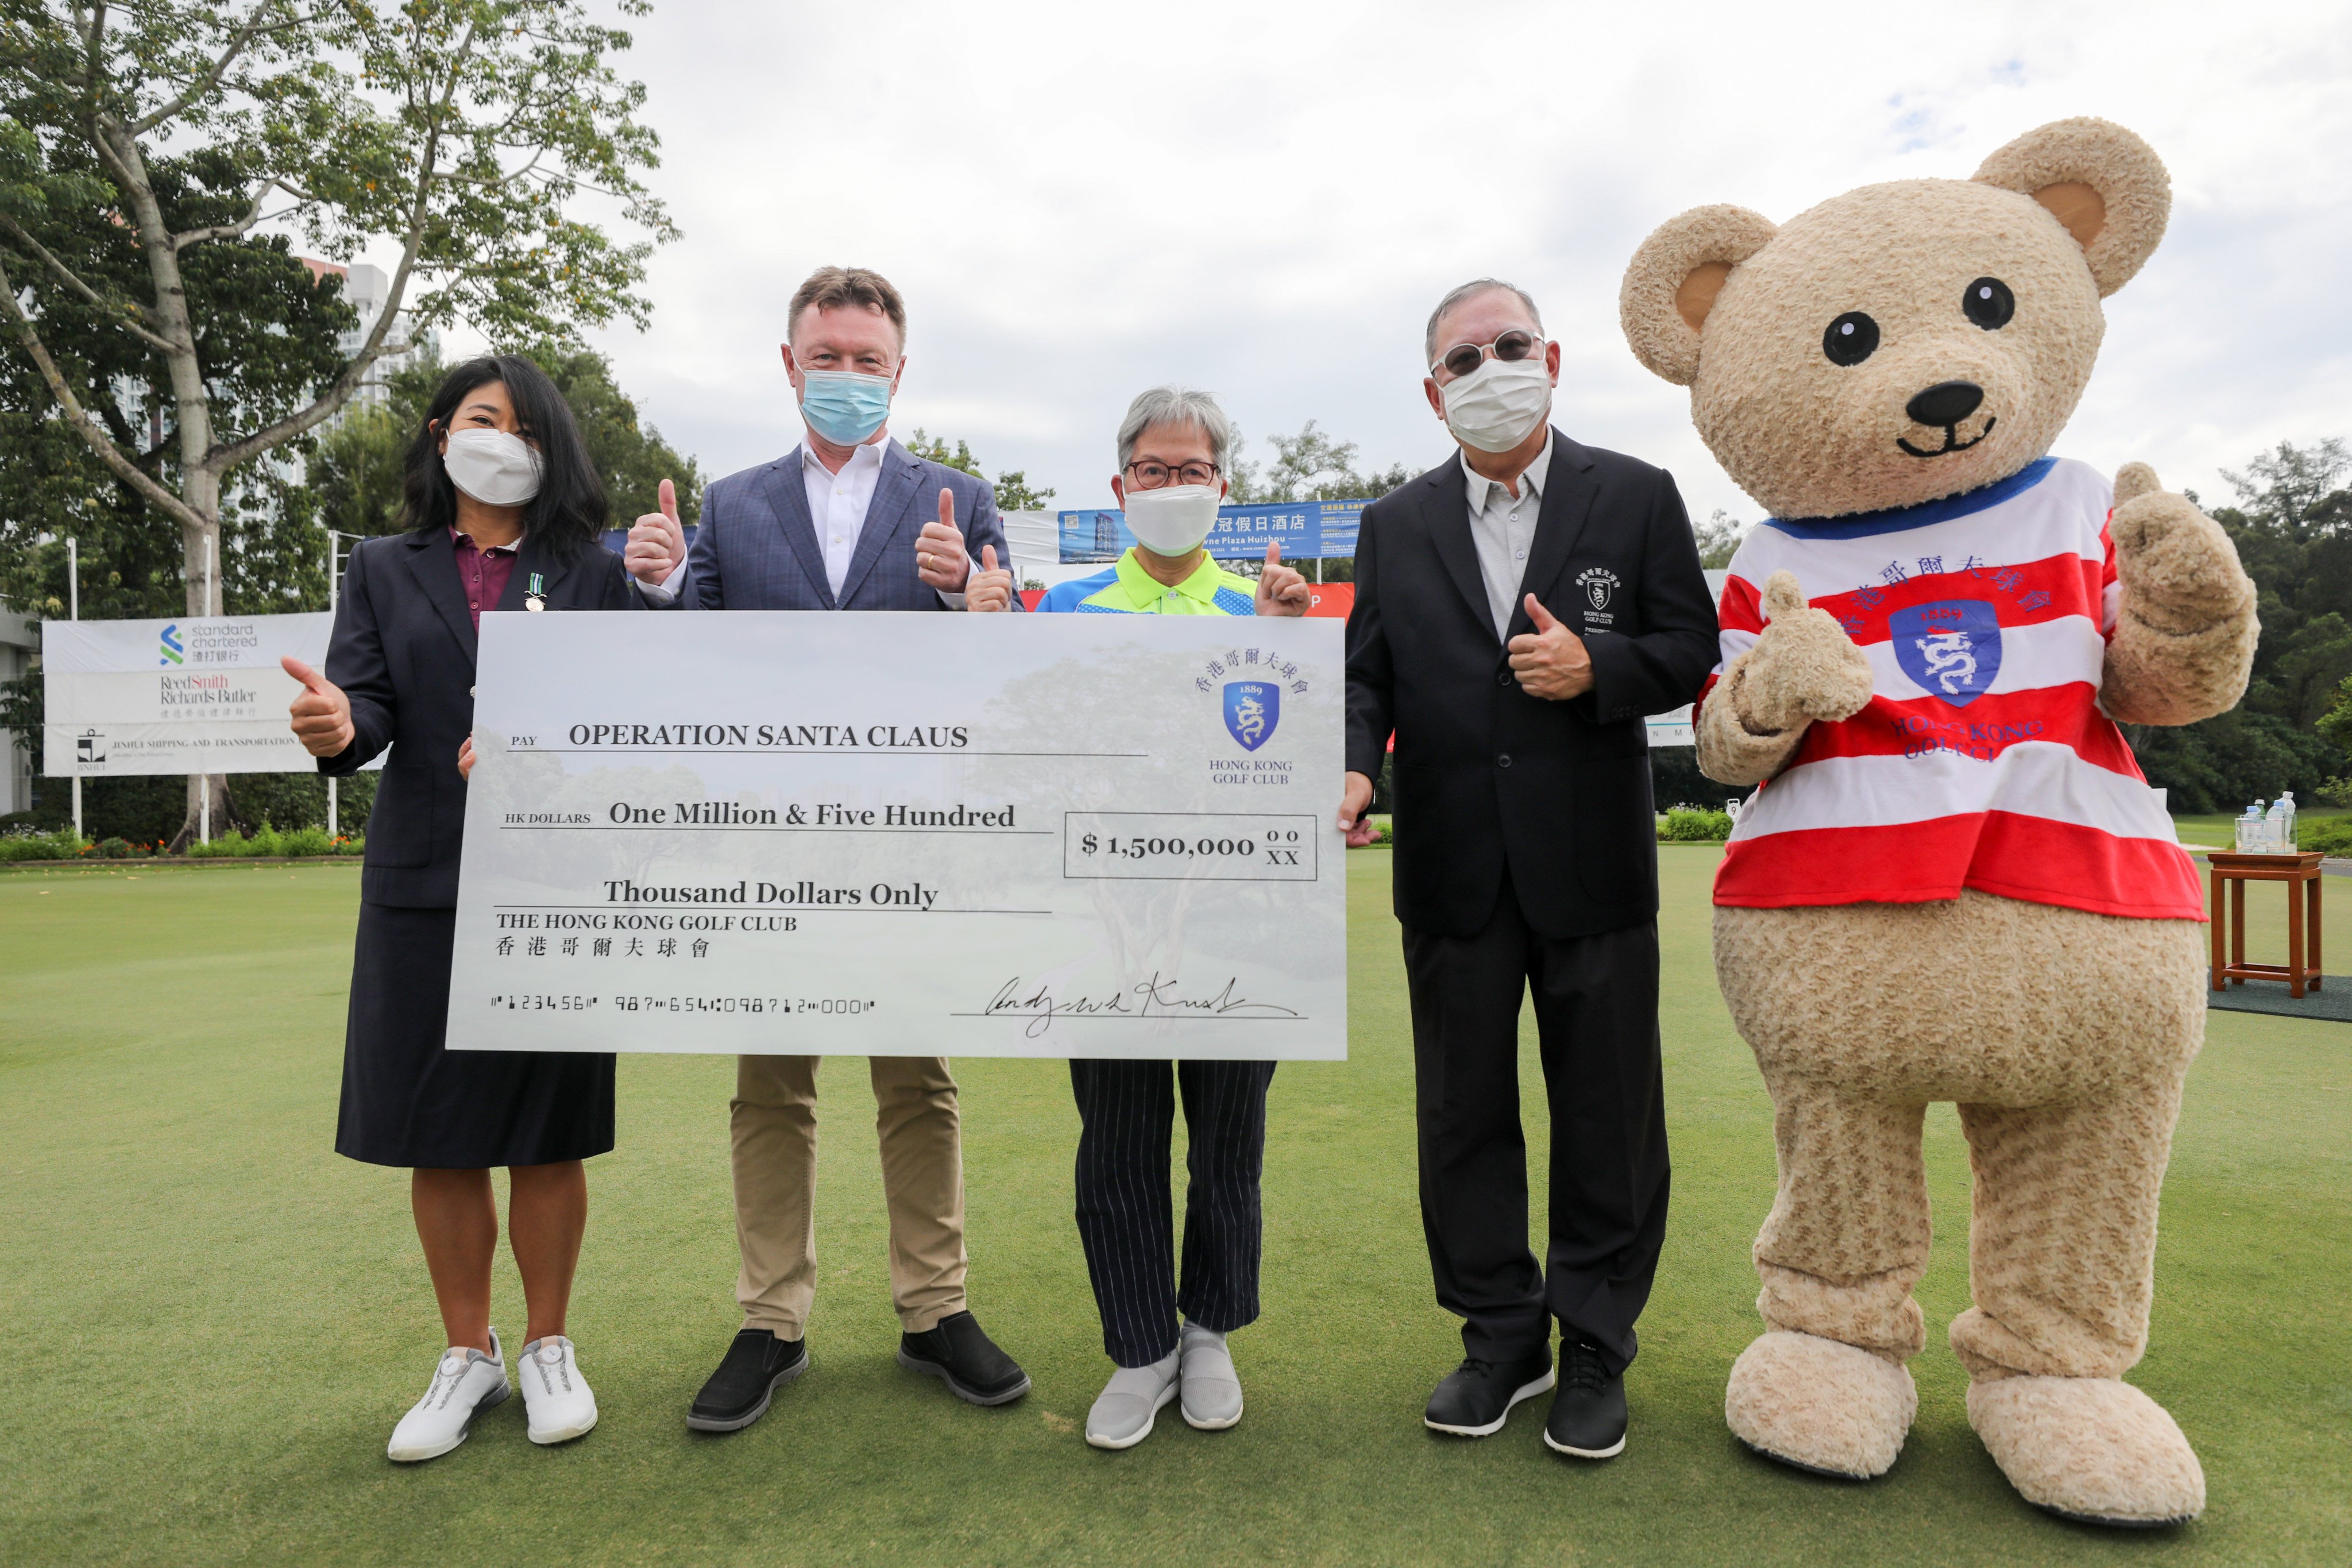 The Hong Kong Golf Club has pledged HK$1.5 million from the money raised in a charity game to Operation Santa Claus. Photo: Xiaomei Chen